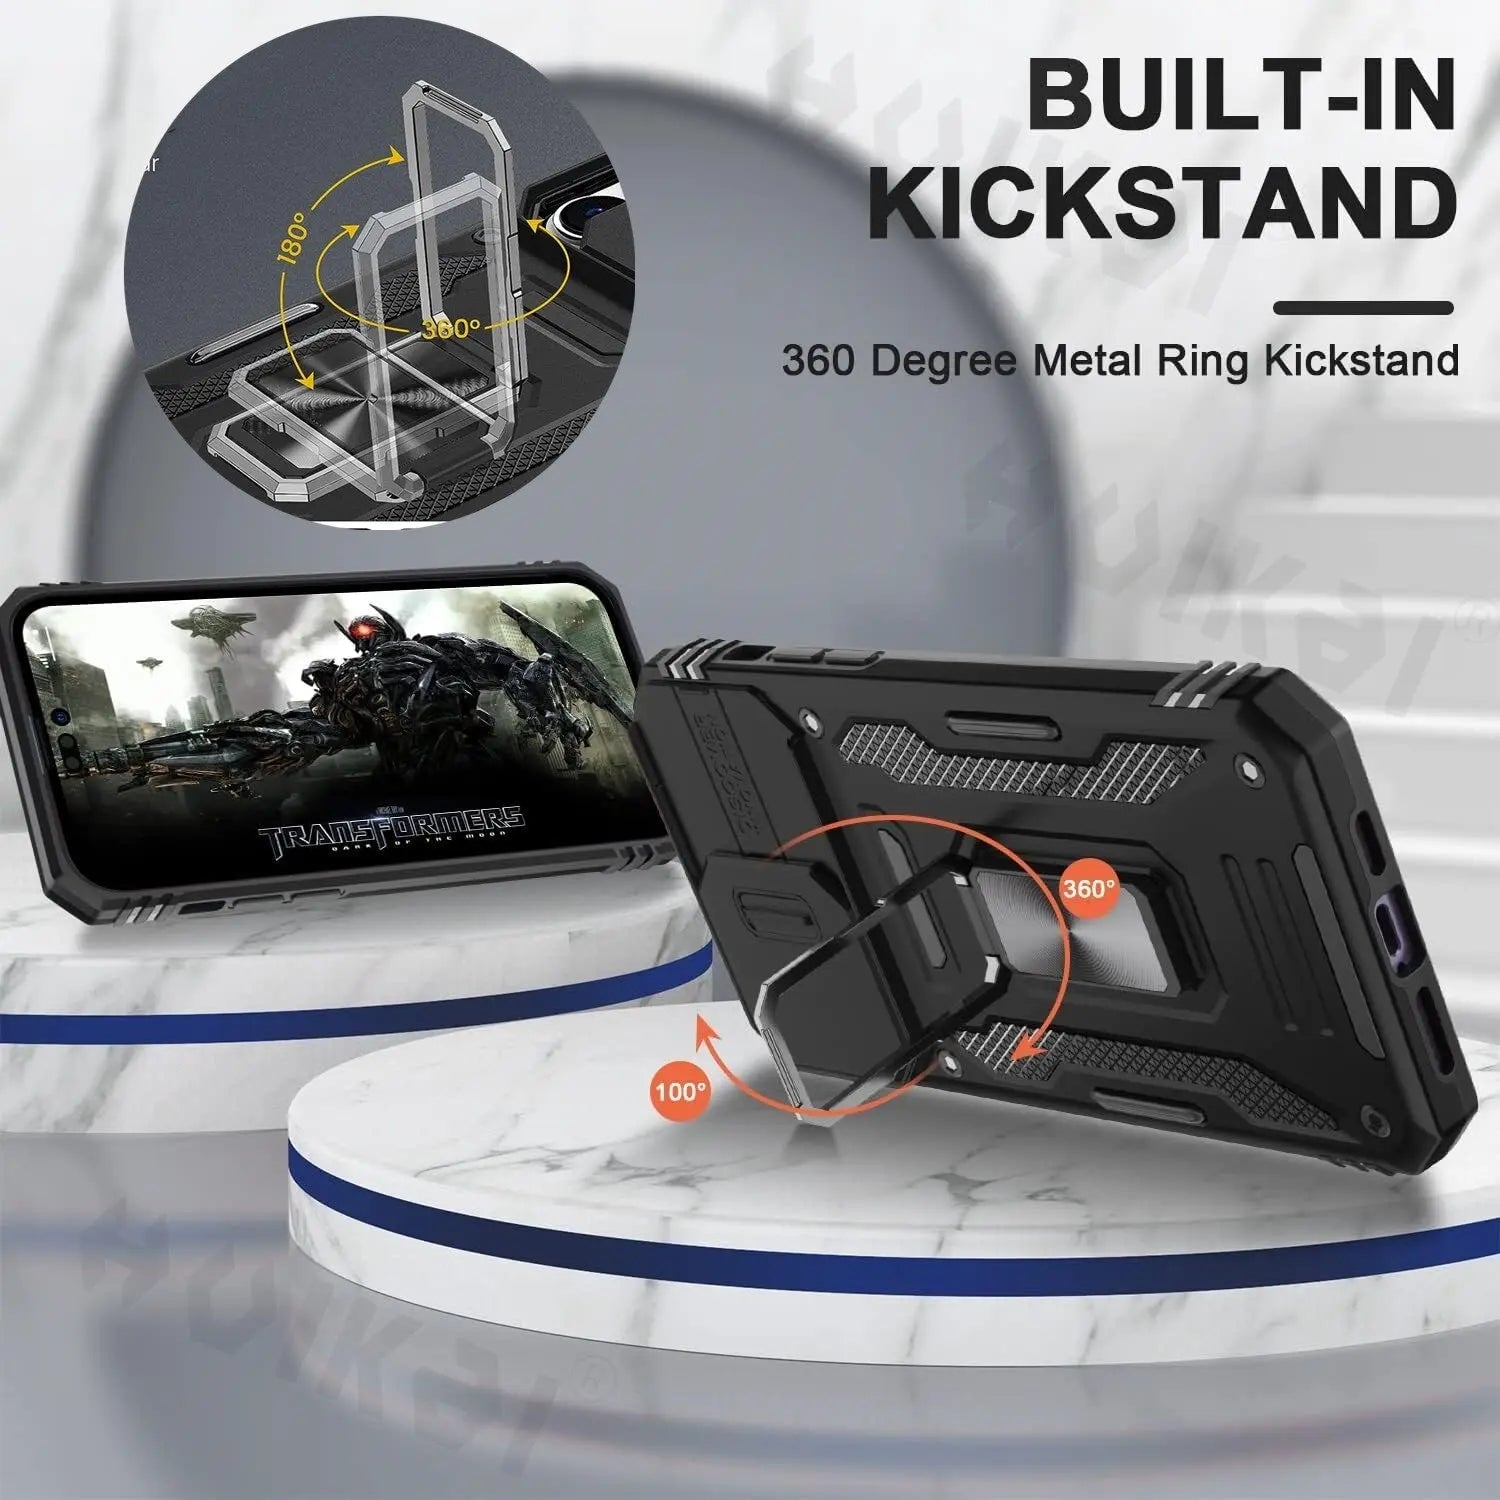 Slide Camera Case For iPhone 15 Pro Max 14 13 12 Pro Max 11 XR XS Max X 8 7 Ring Stand Armor Anti-fall Protection Kickstand Cove Pinnacle Luxuries